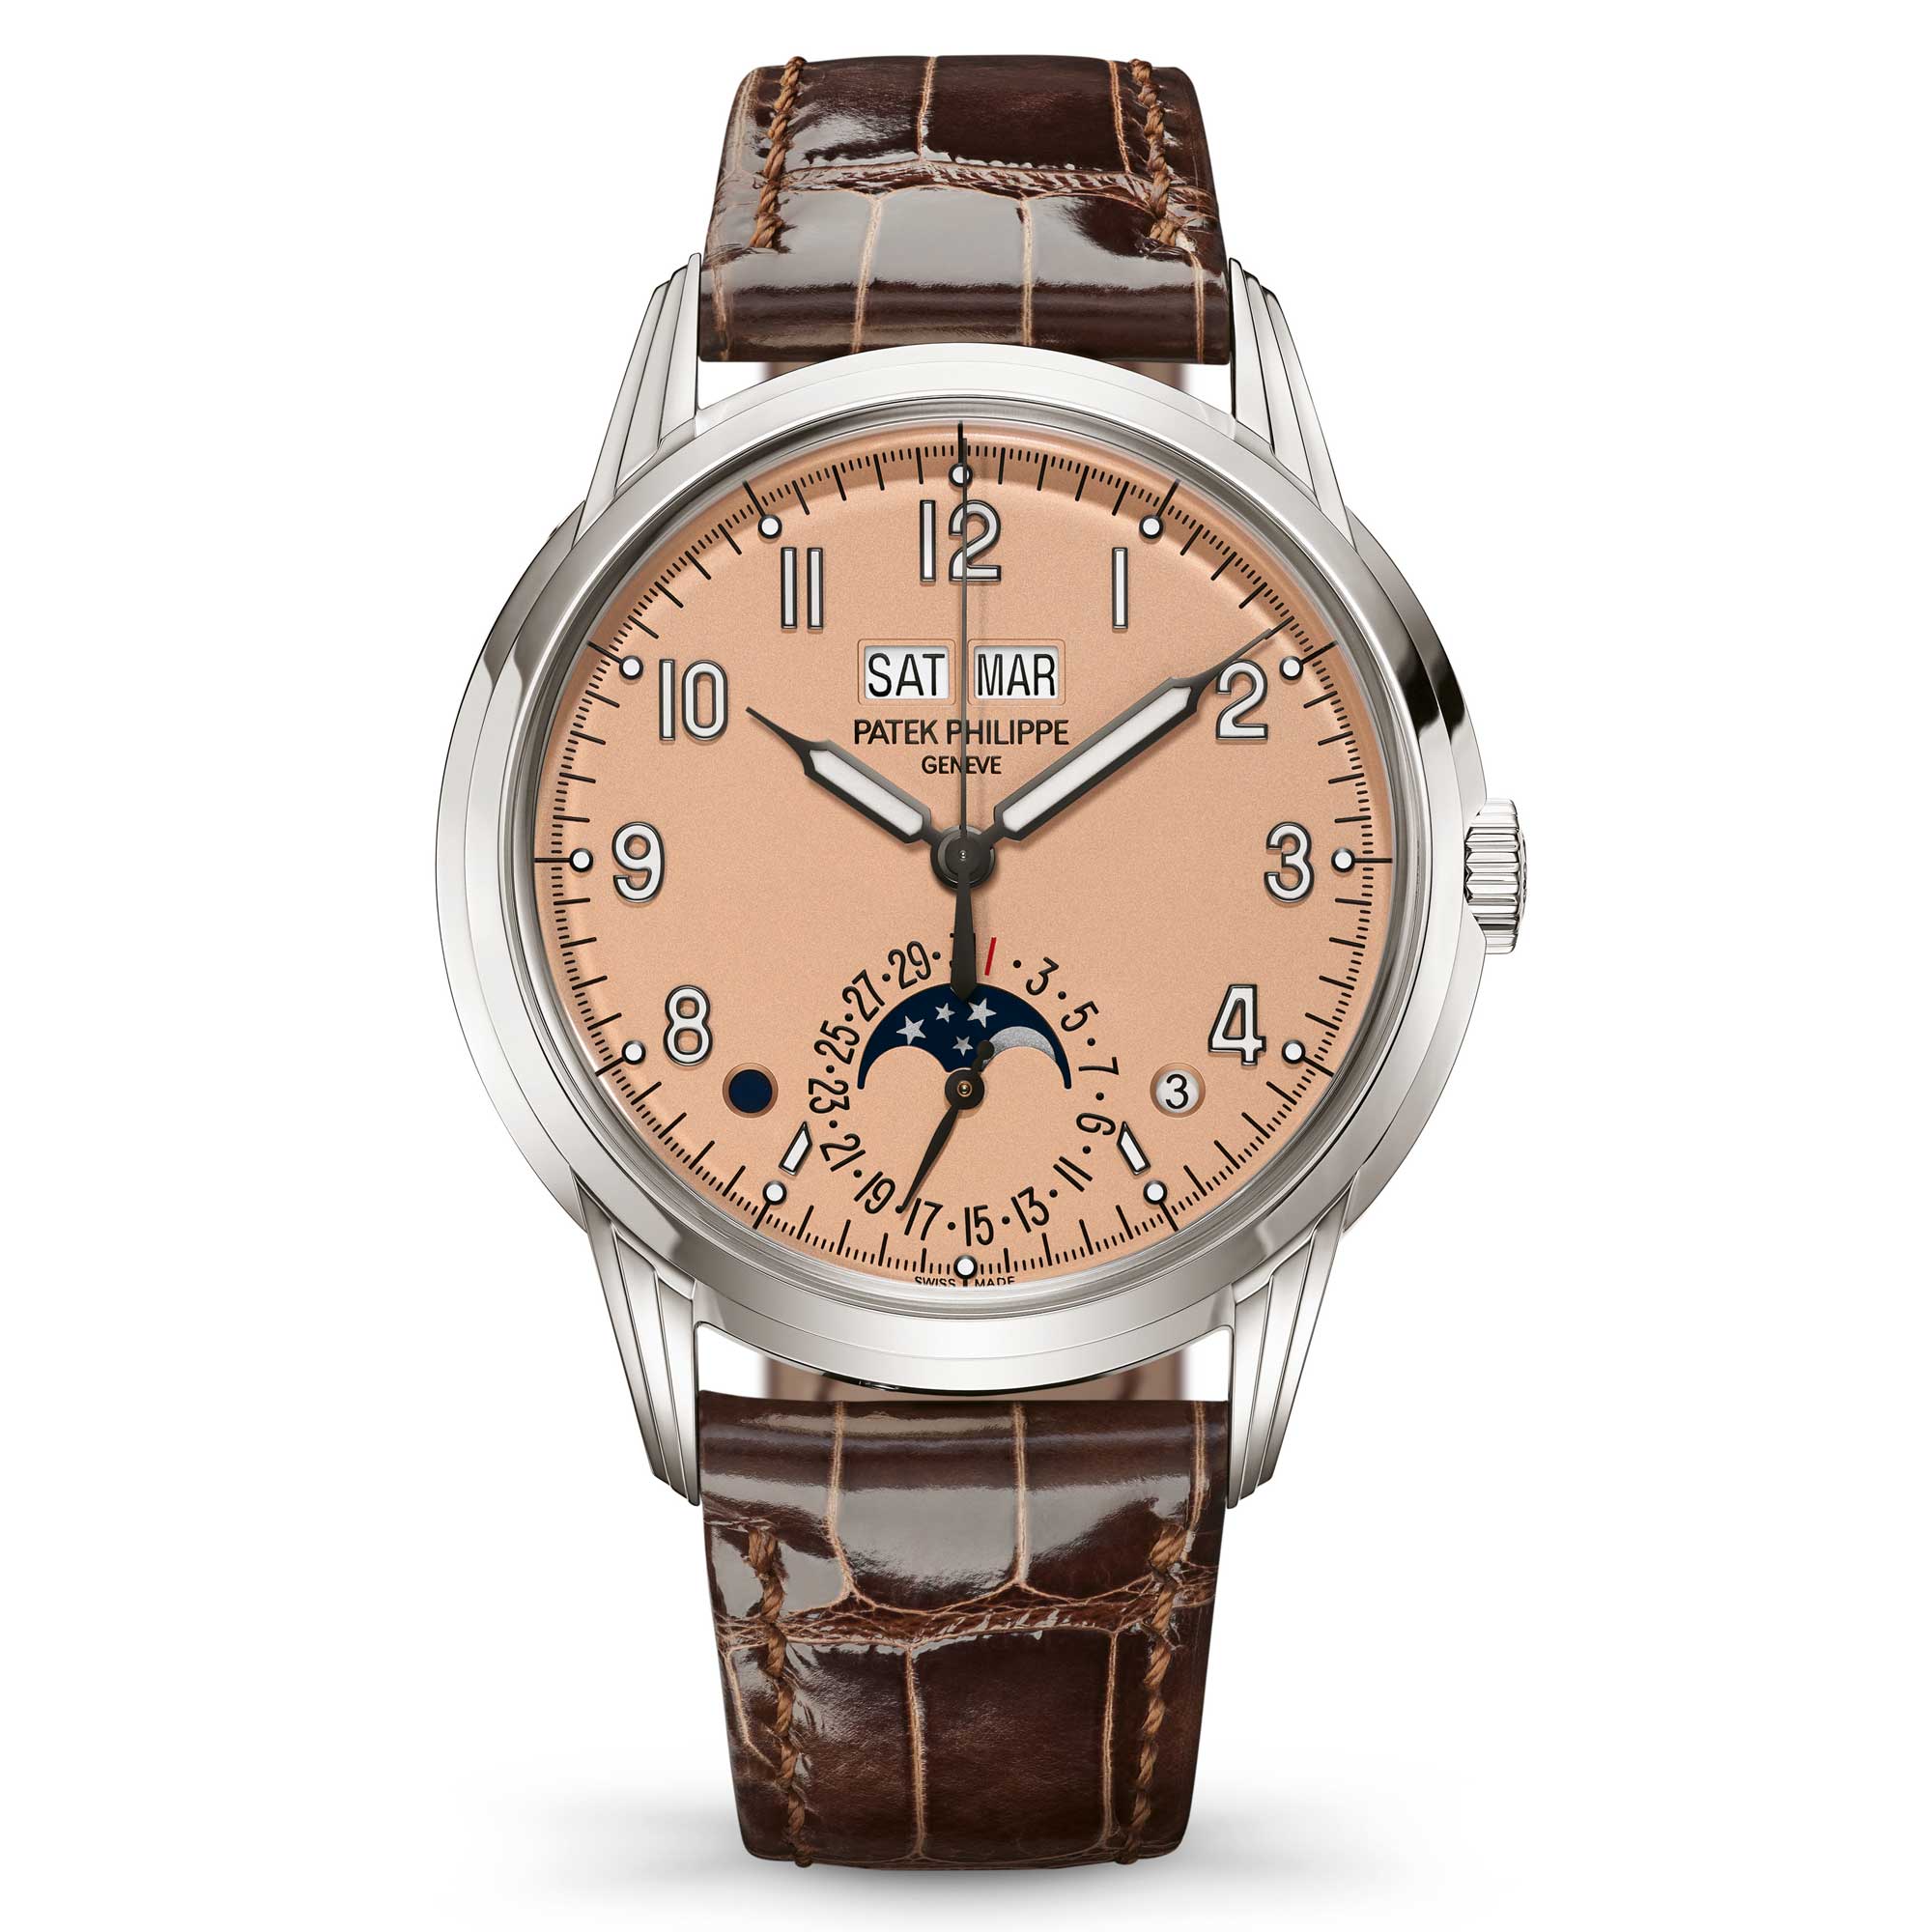 The Ref. 5320 is another Patek Philippe watch that has been given an uplifting new colorway